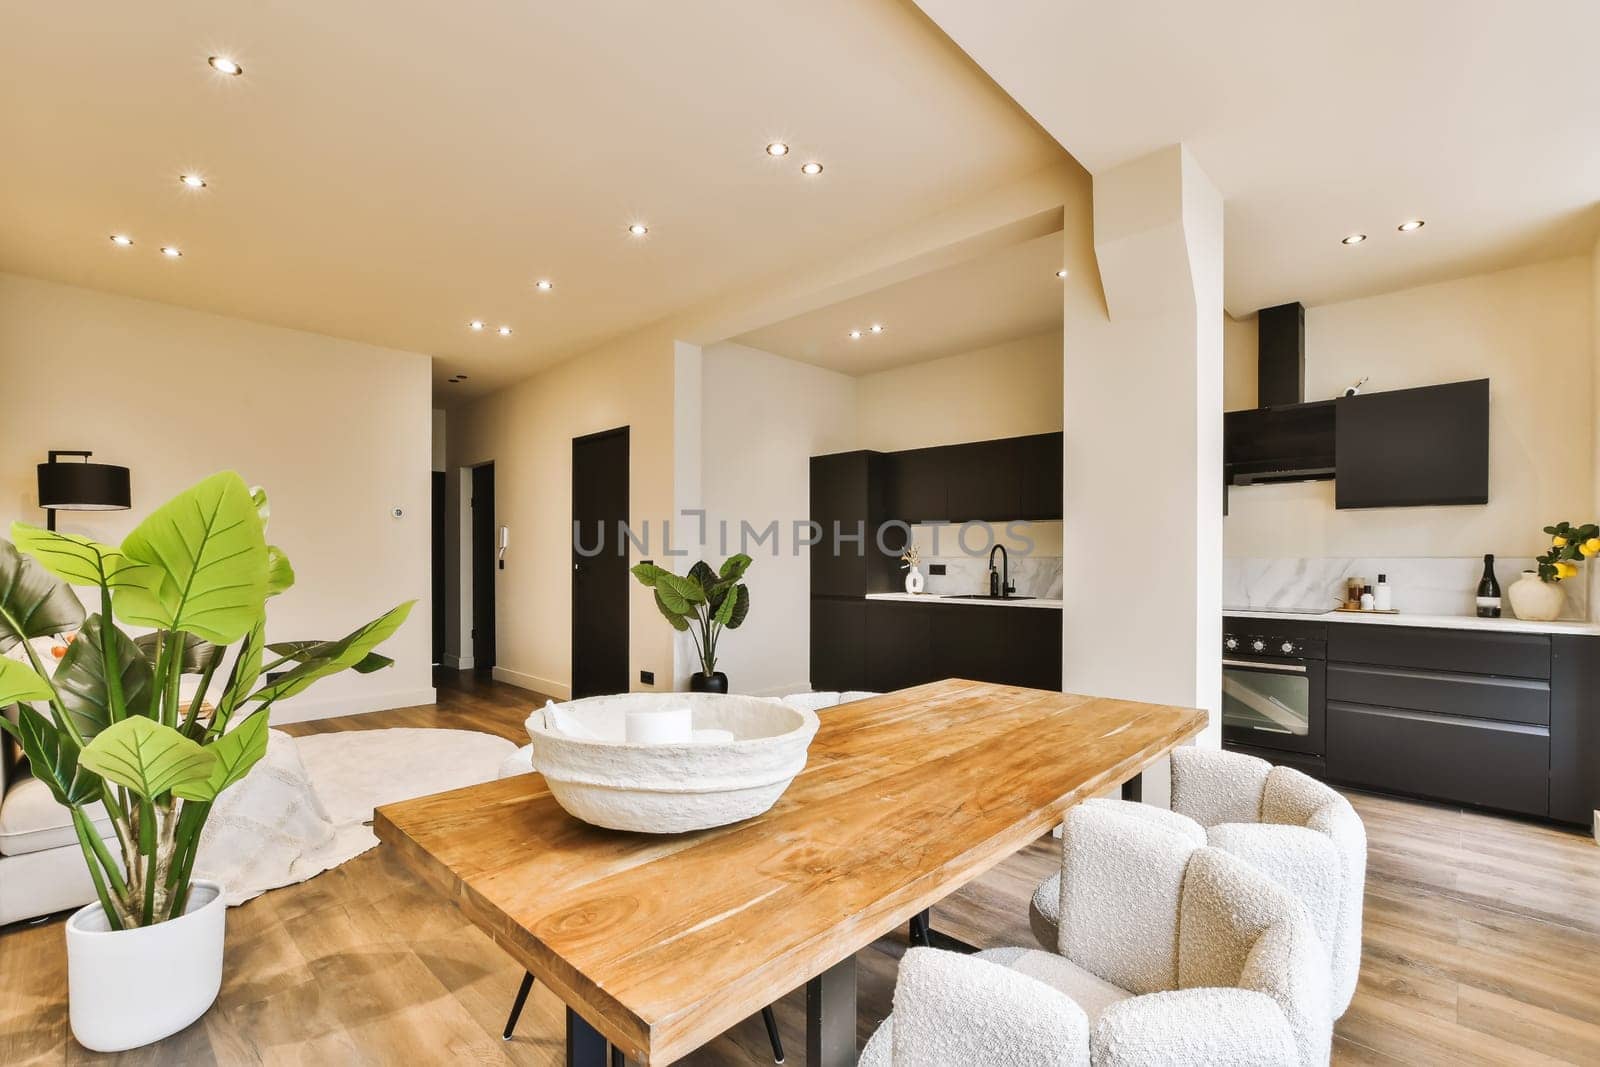 a kitchen and dining area in a modern home with wood flooring, white walls and black cabinetd cabinets